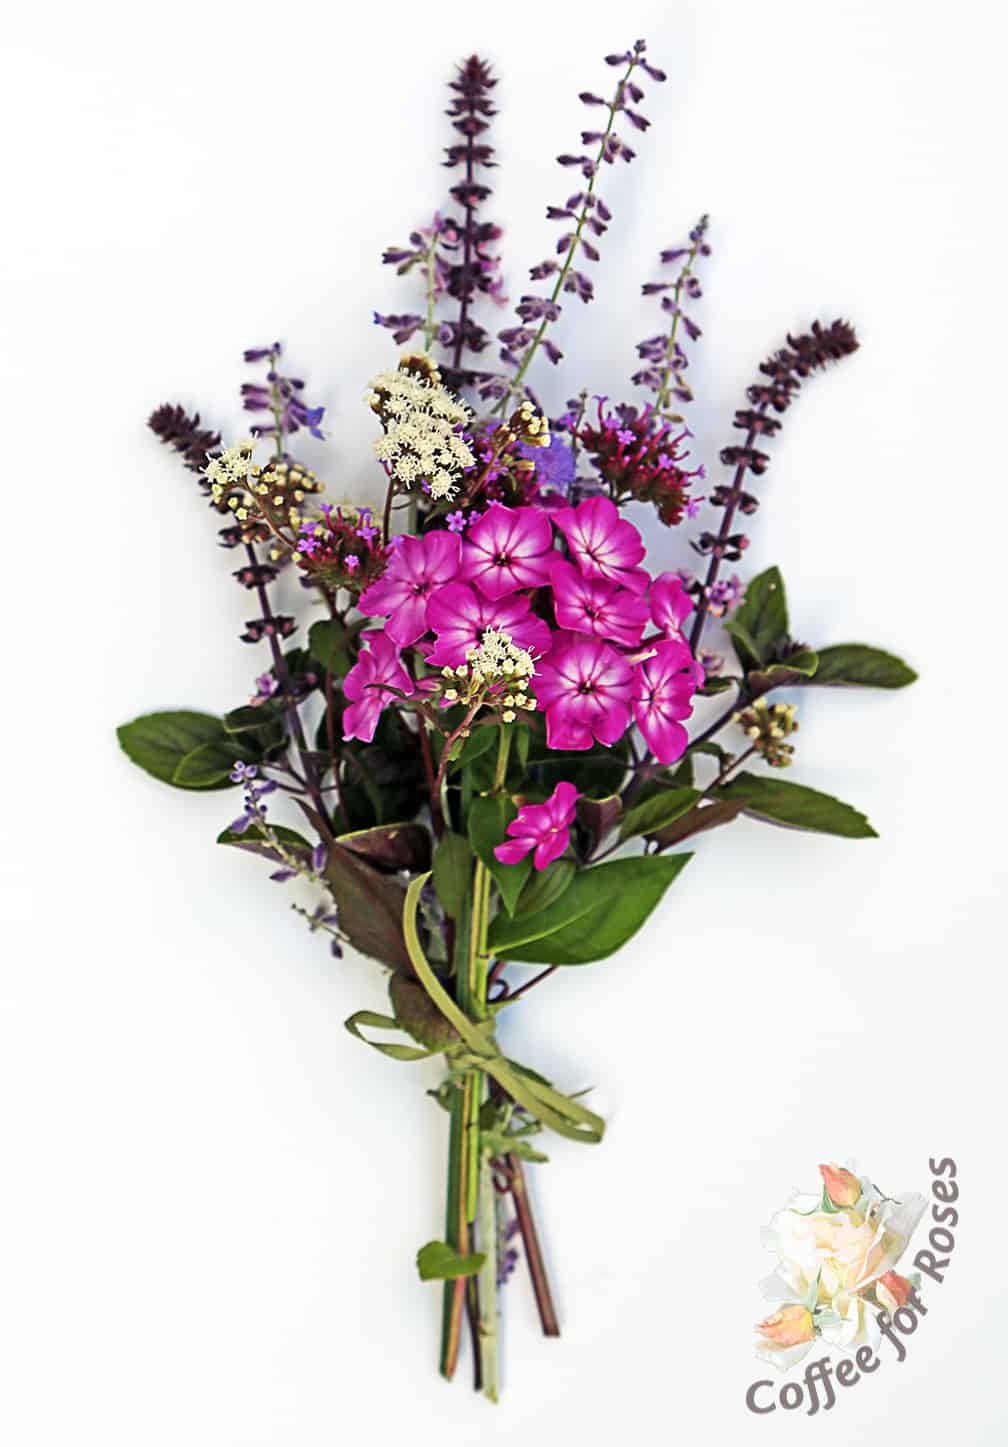 This bouquet has a sprig of Volcano Pholox, some African Blue Basil and a stem of Vitex.